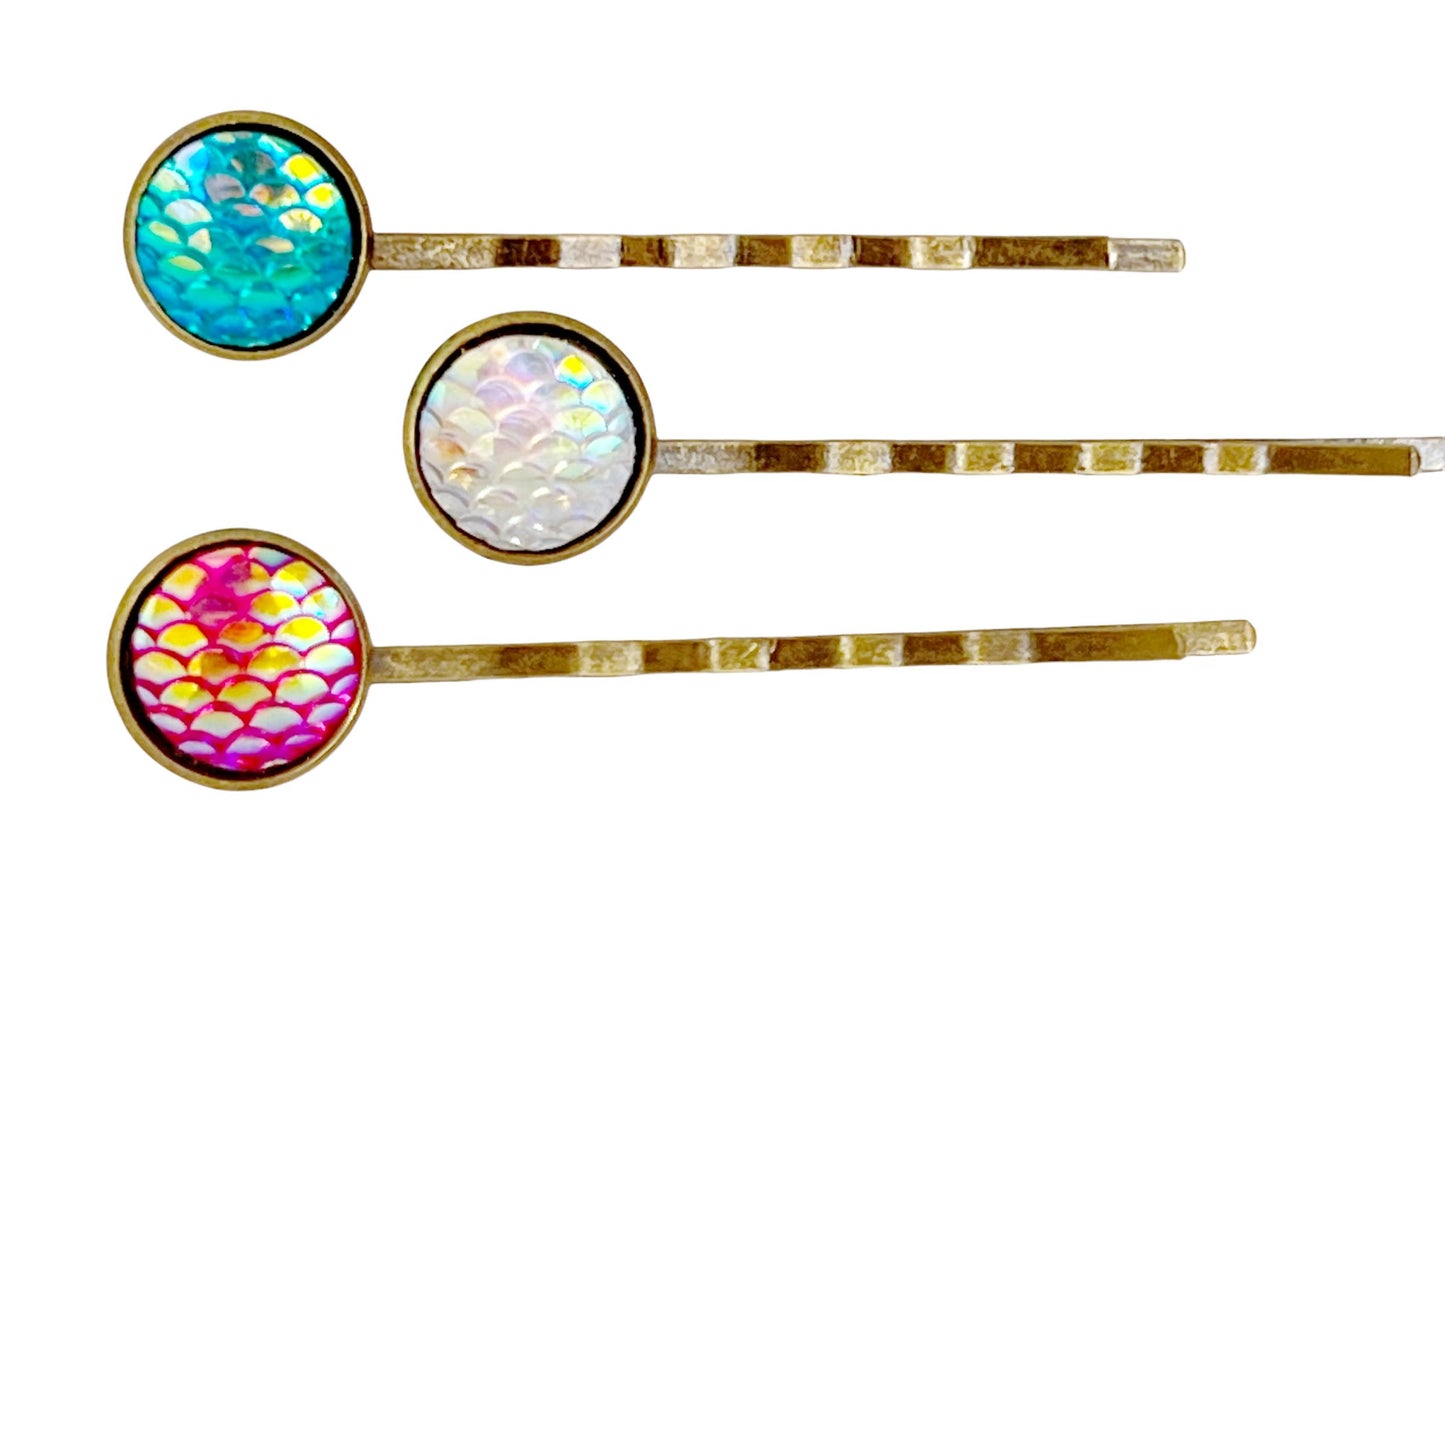 Brass Mermaid Hair Pins: Set of 3 in Pink, White, and Blue Colors for Enchanting Hairstyles